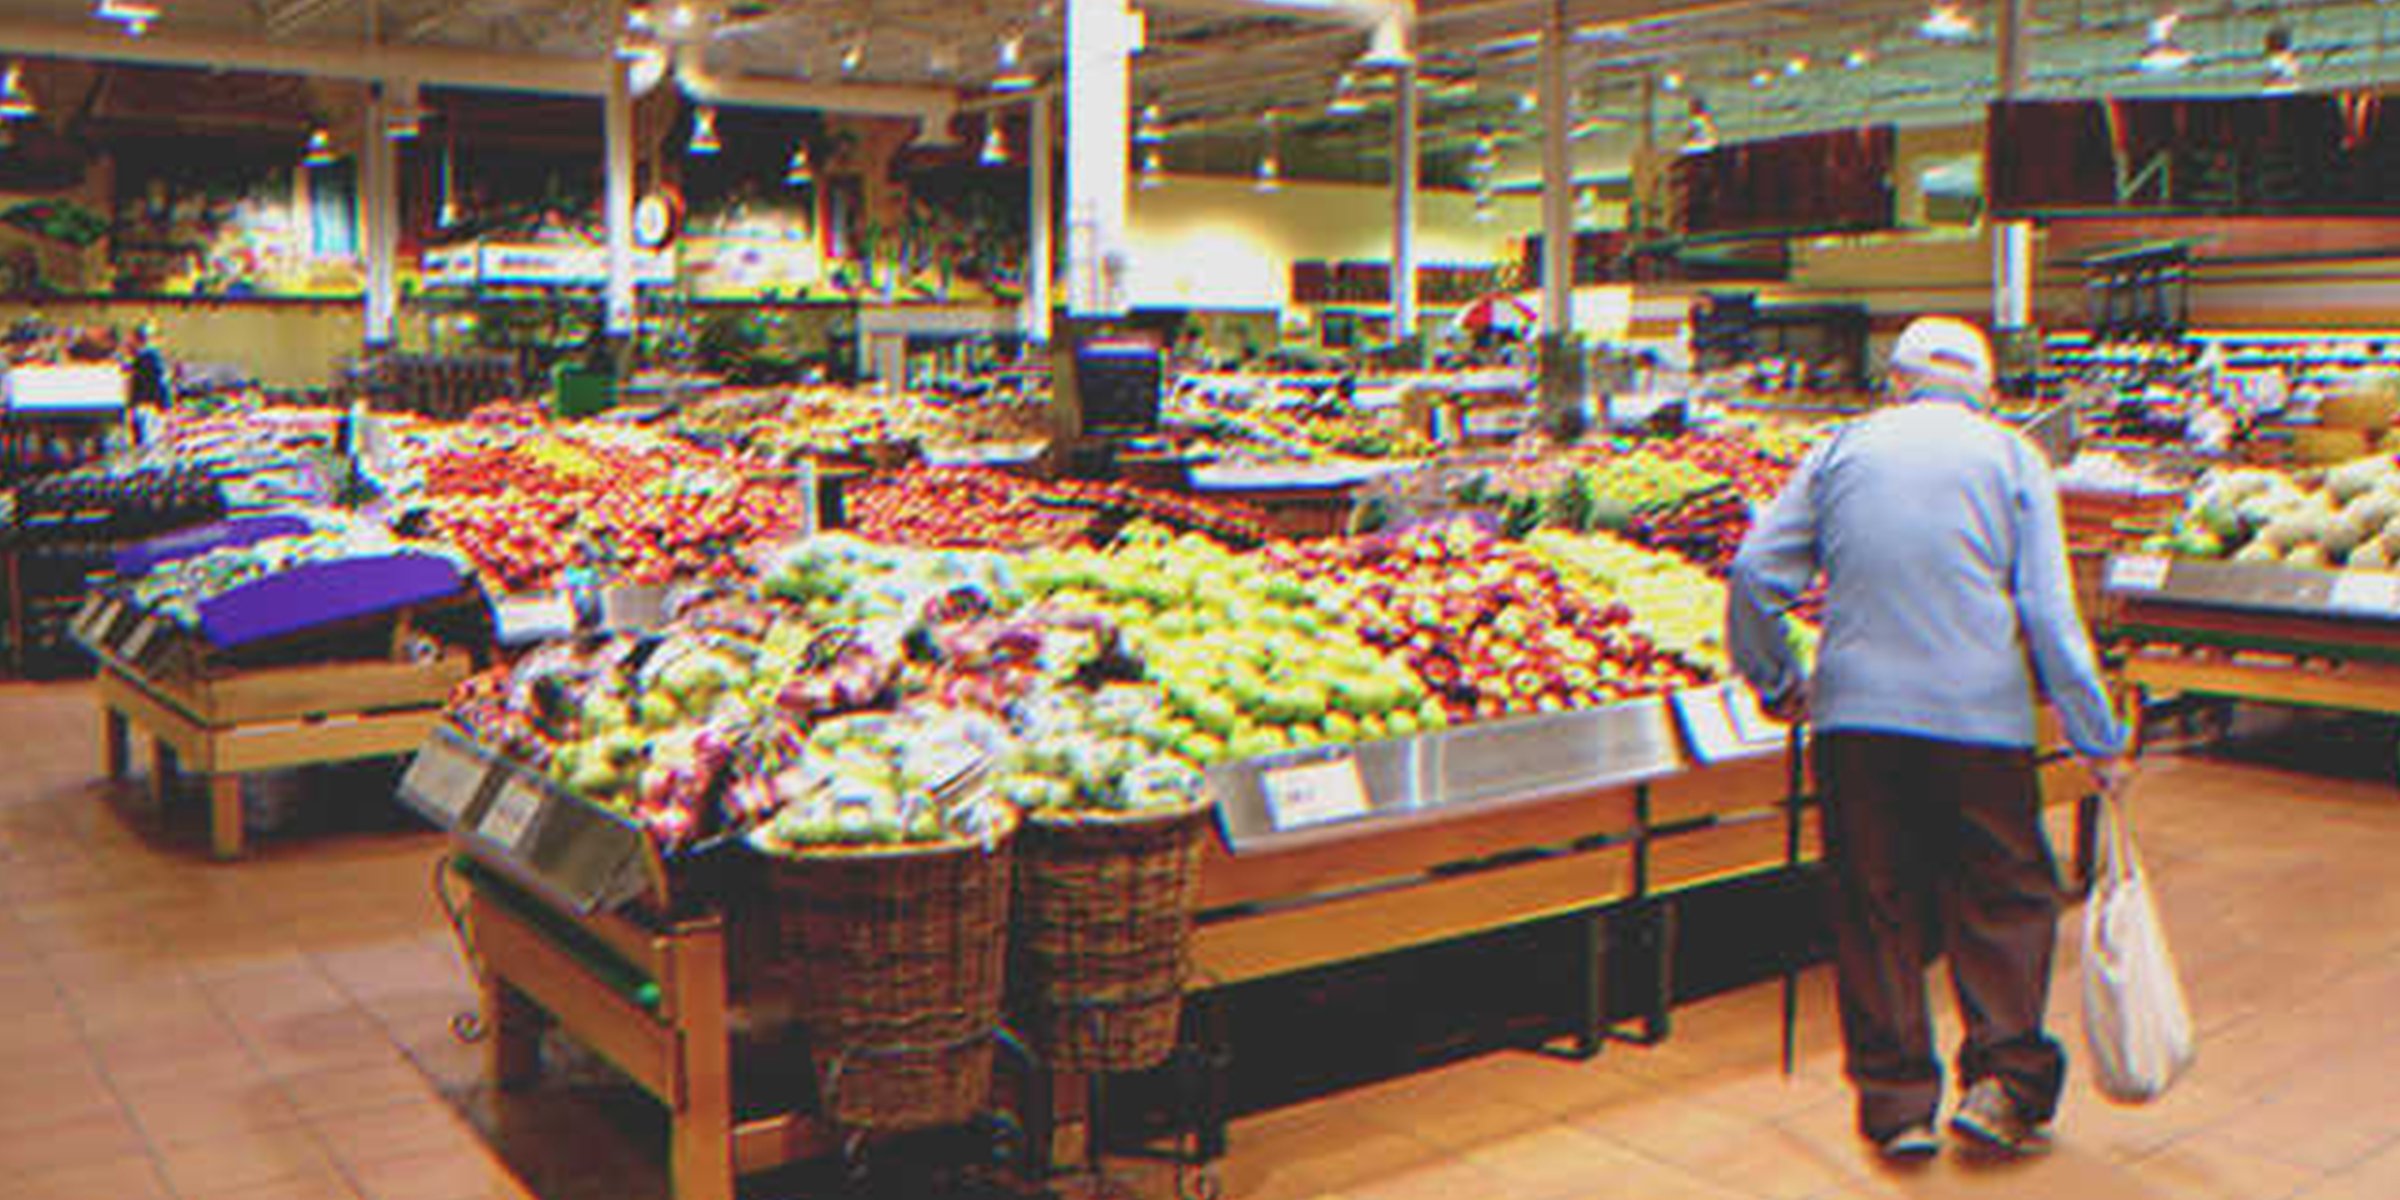 An old man in a supermarket | Source: Shutterstock